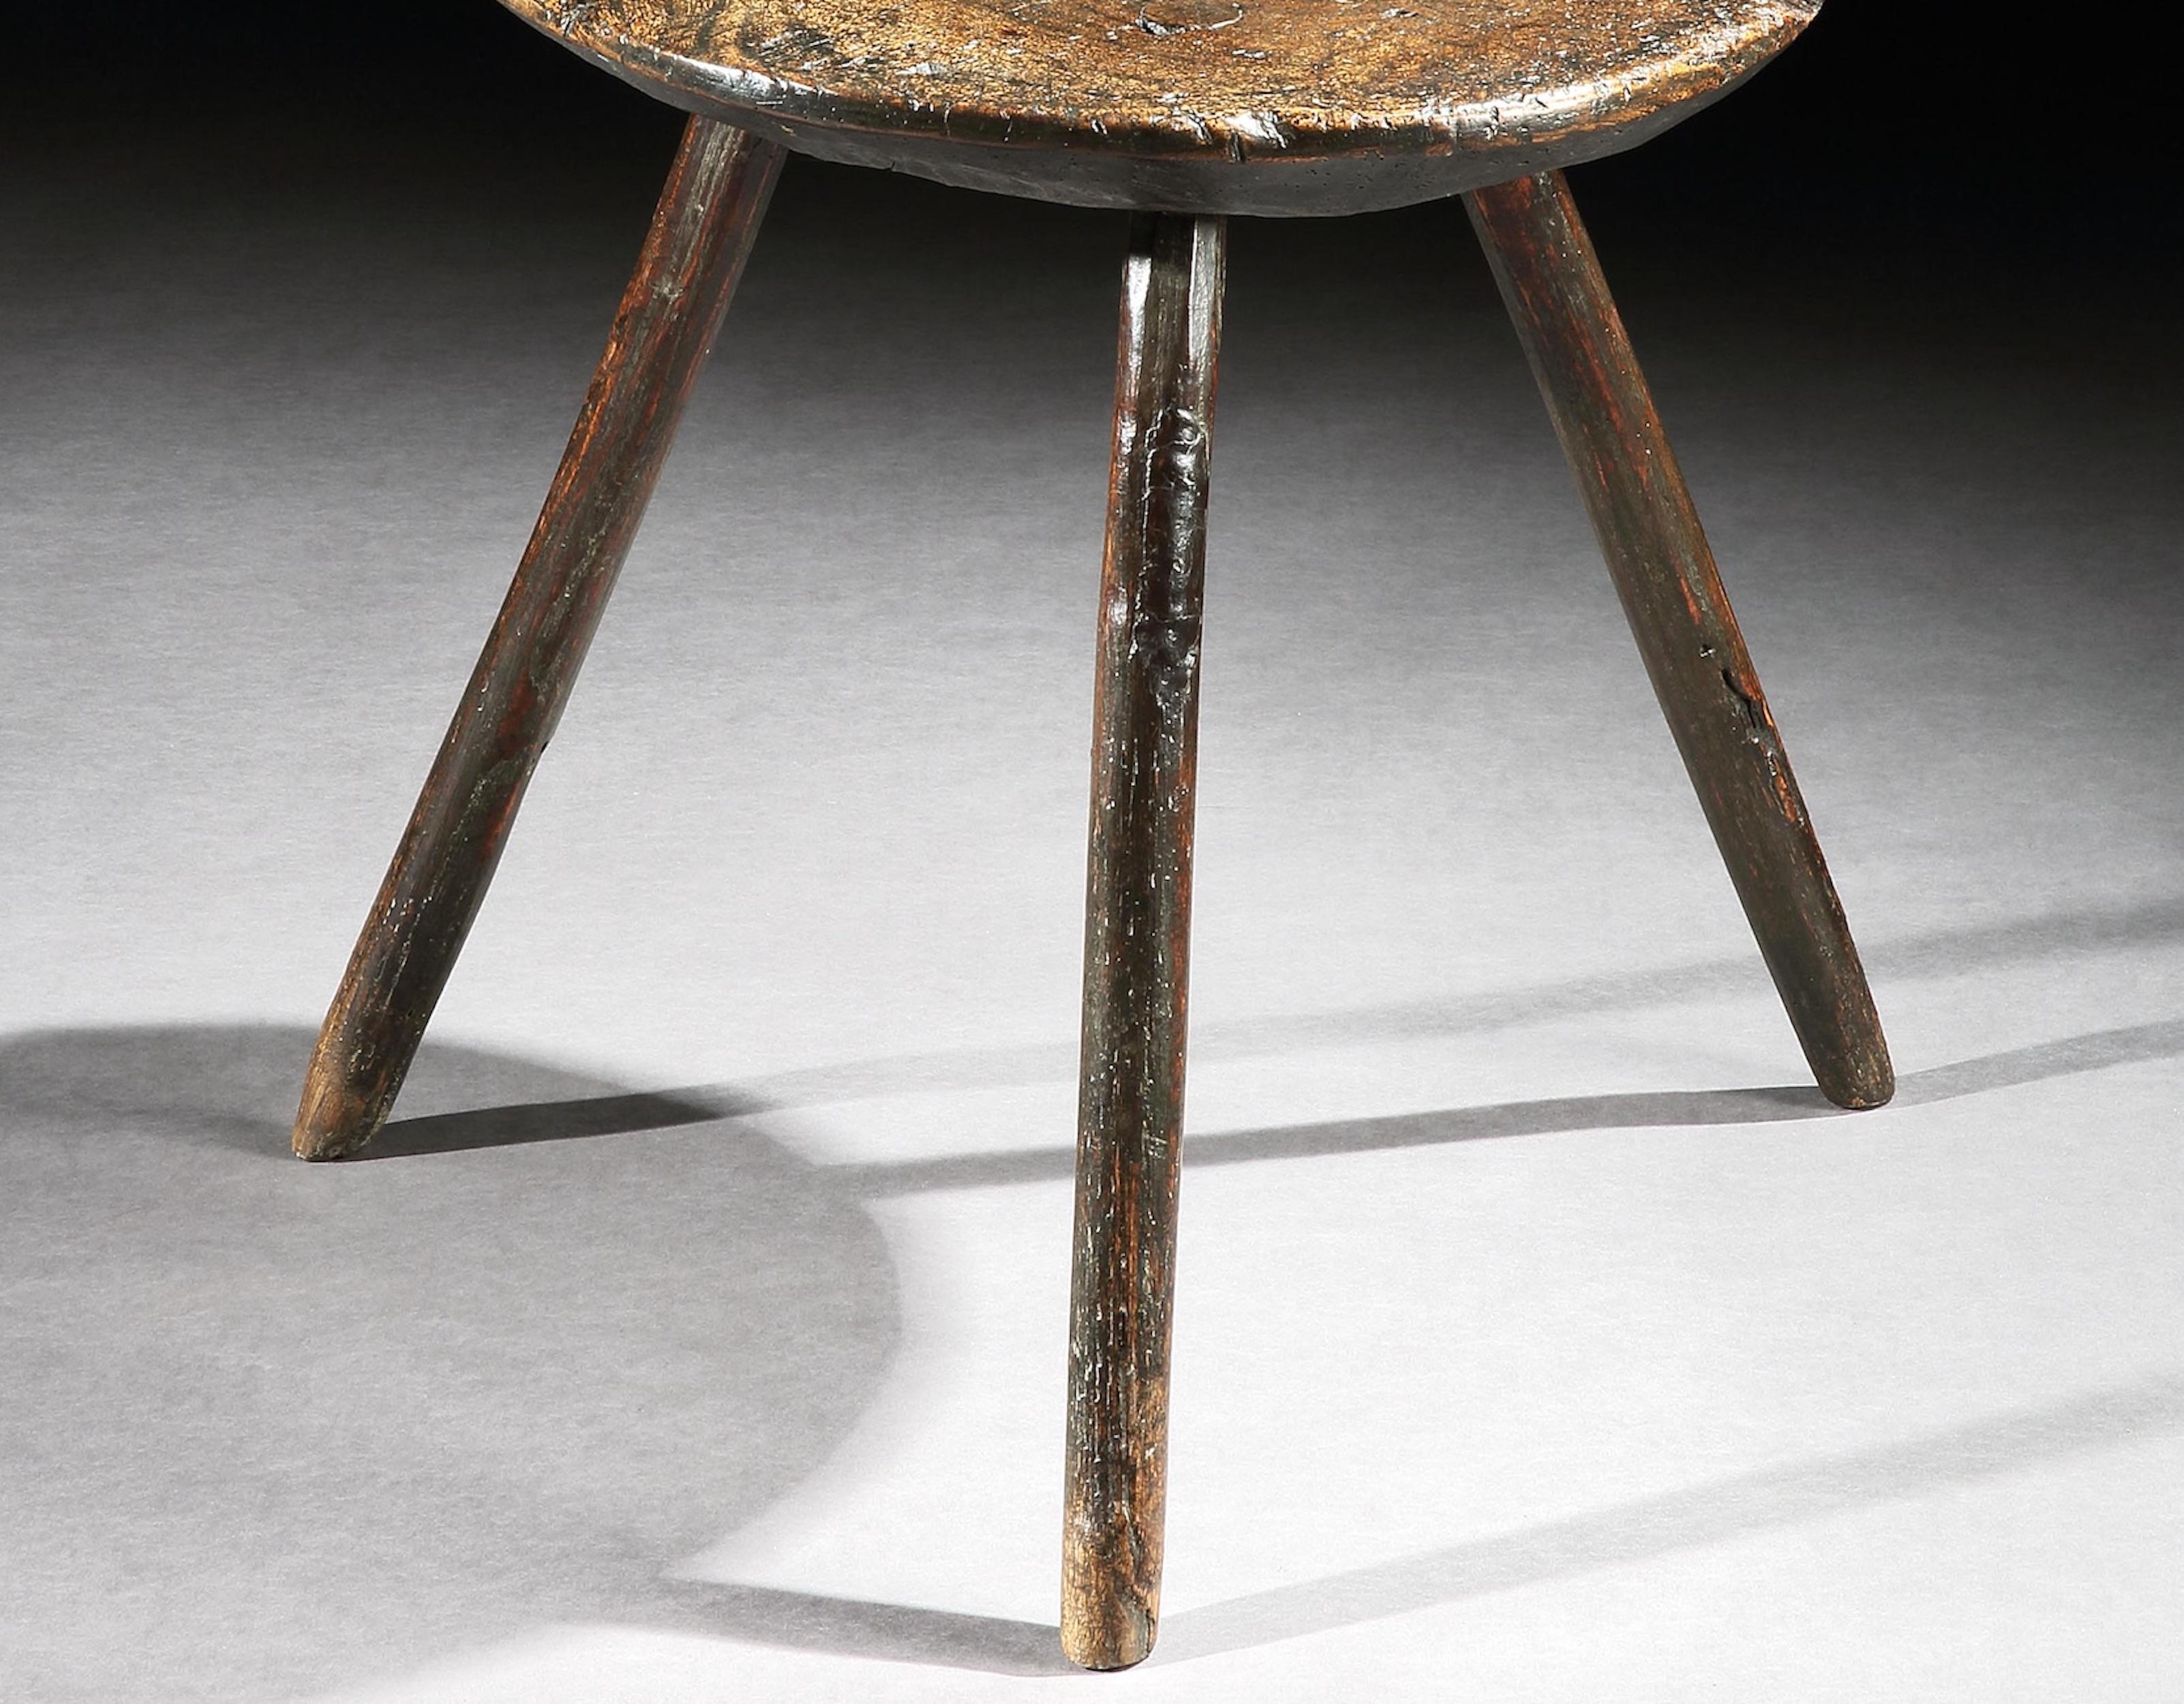 Joinery Table, Cricket, 18th Century, English George I, Vernacular, Elm, Ash